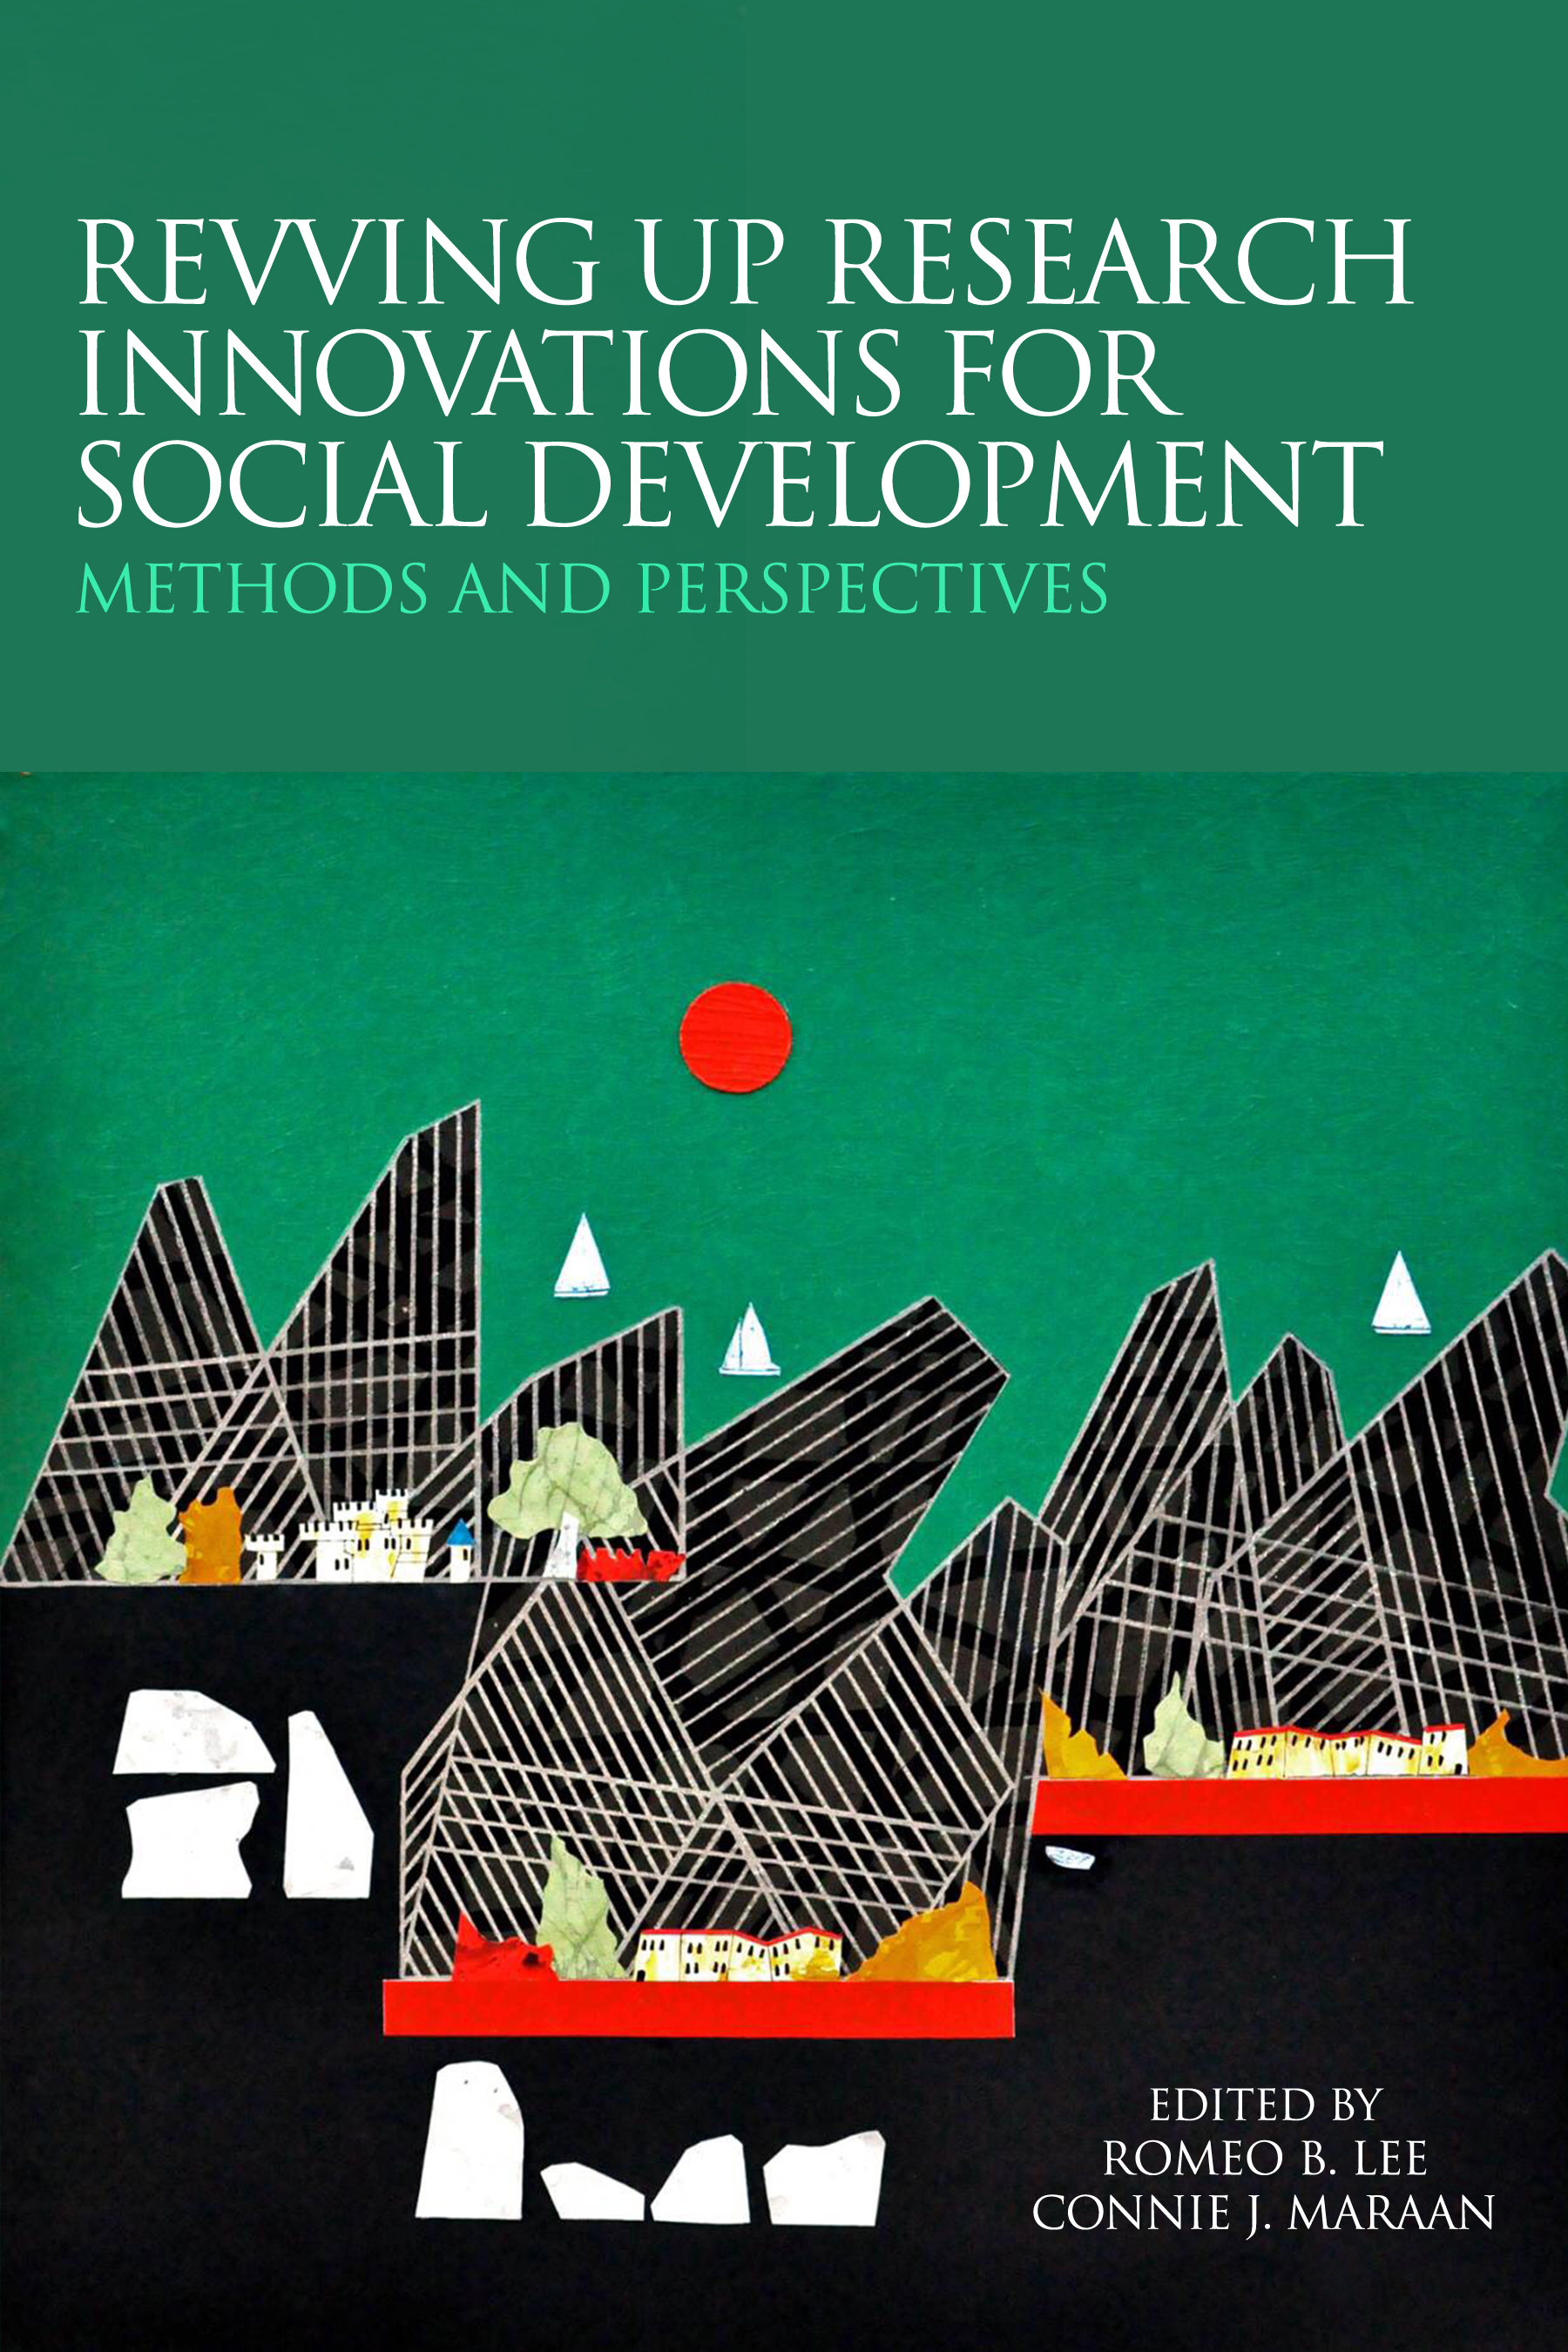 Revving up research innovations for social development methods and perspectives